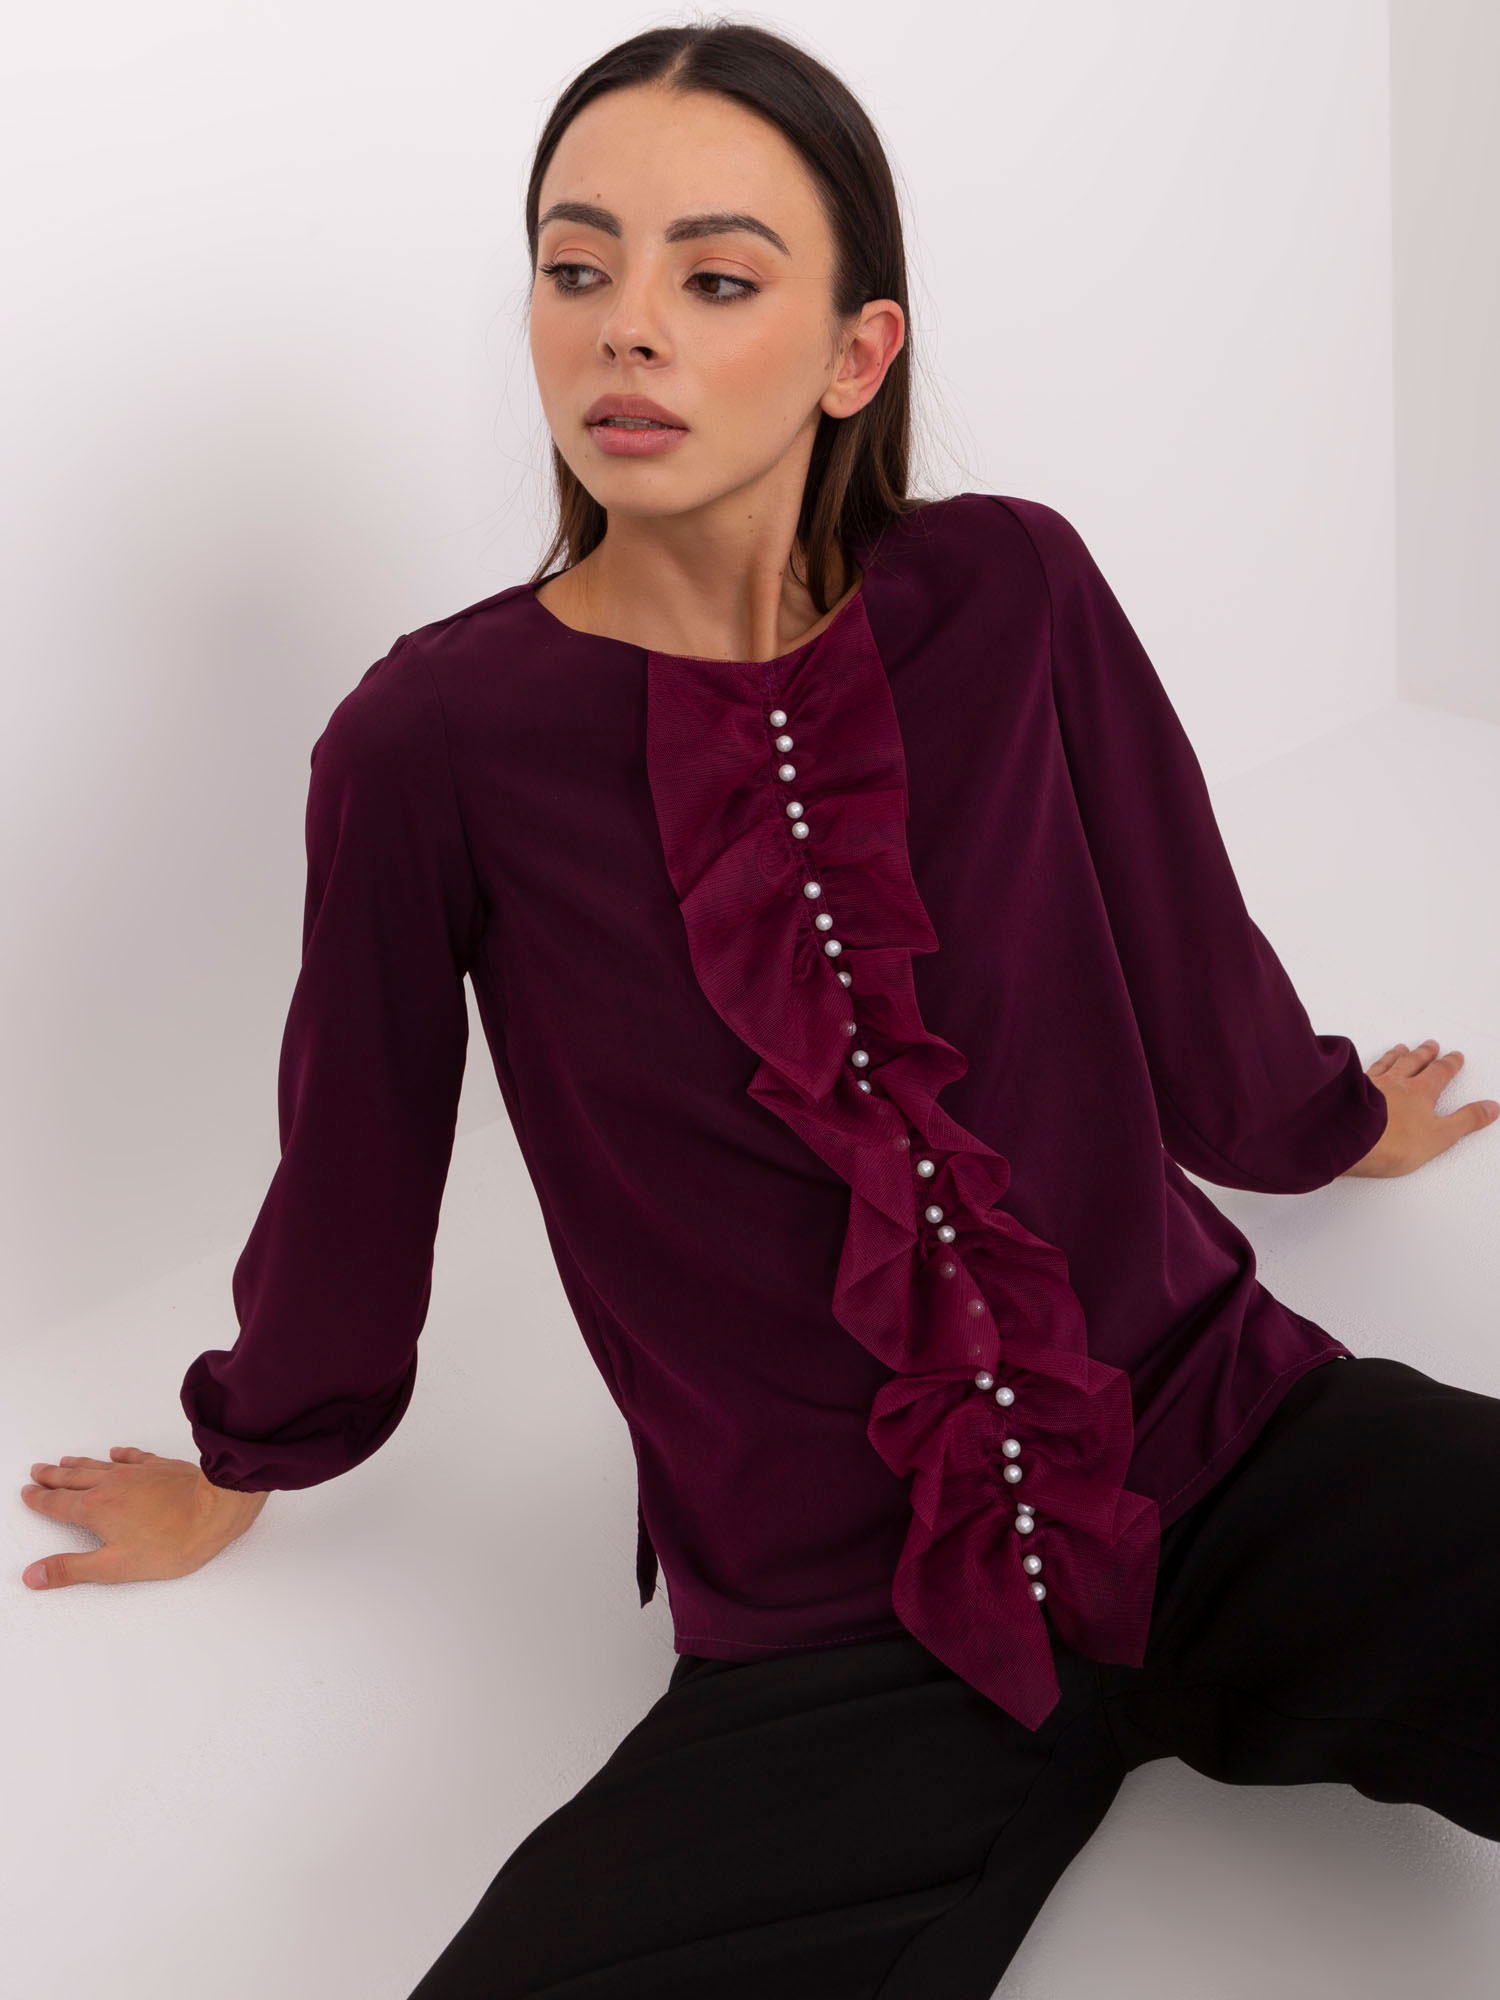 Dark Purple Formal Blouse With Pearls